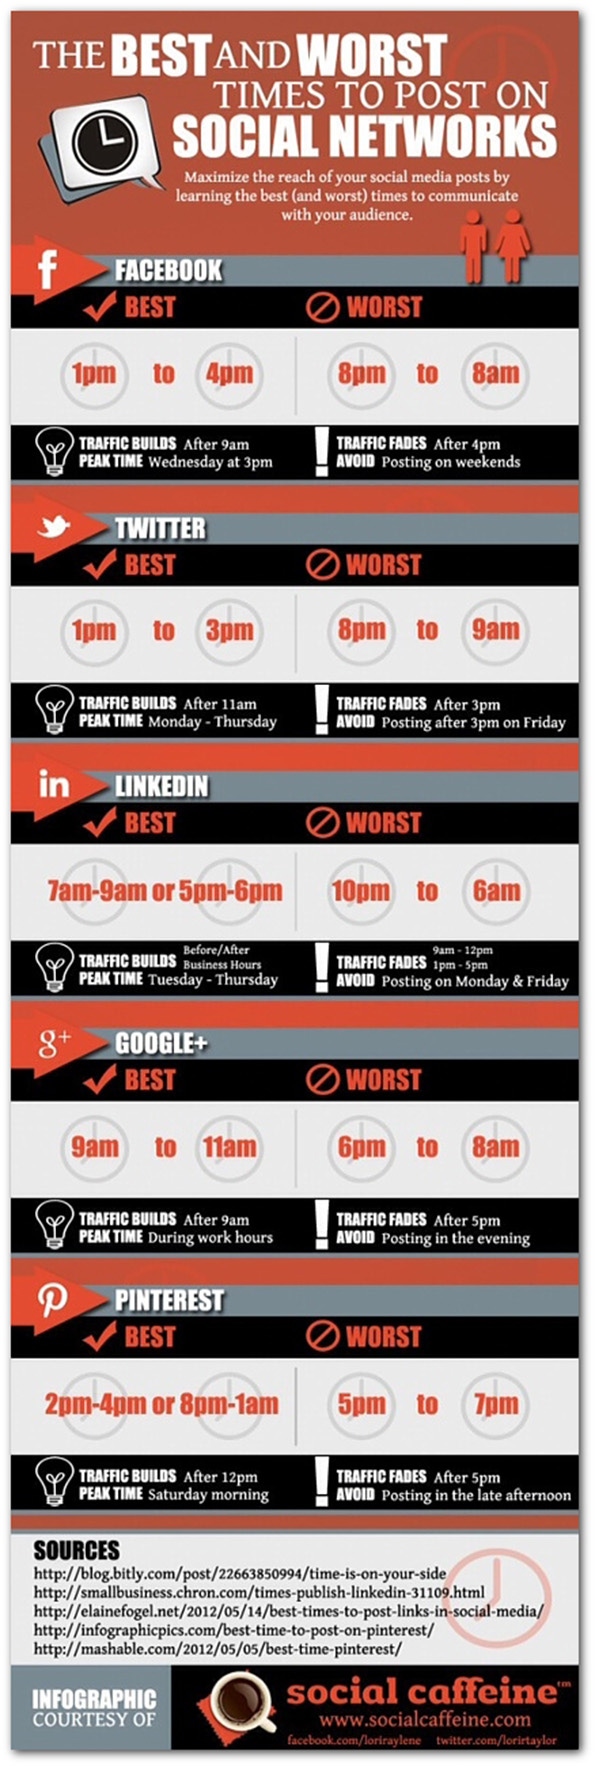 Infographic: Best and worst times to get social